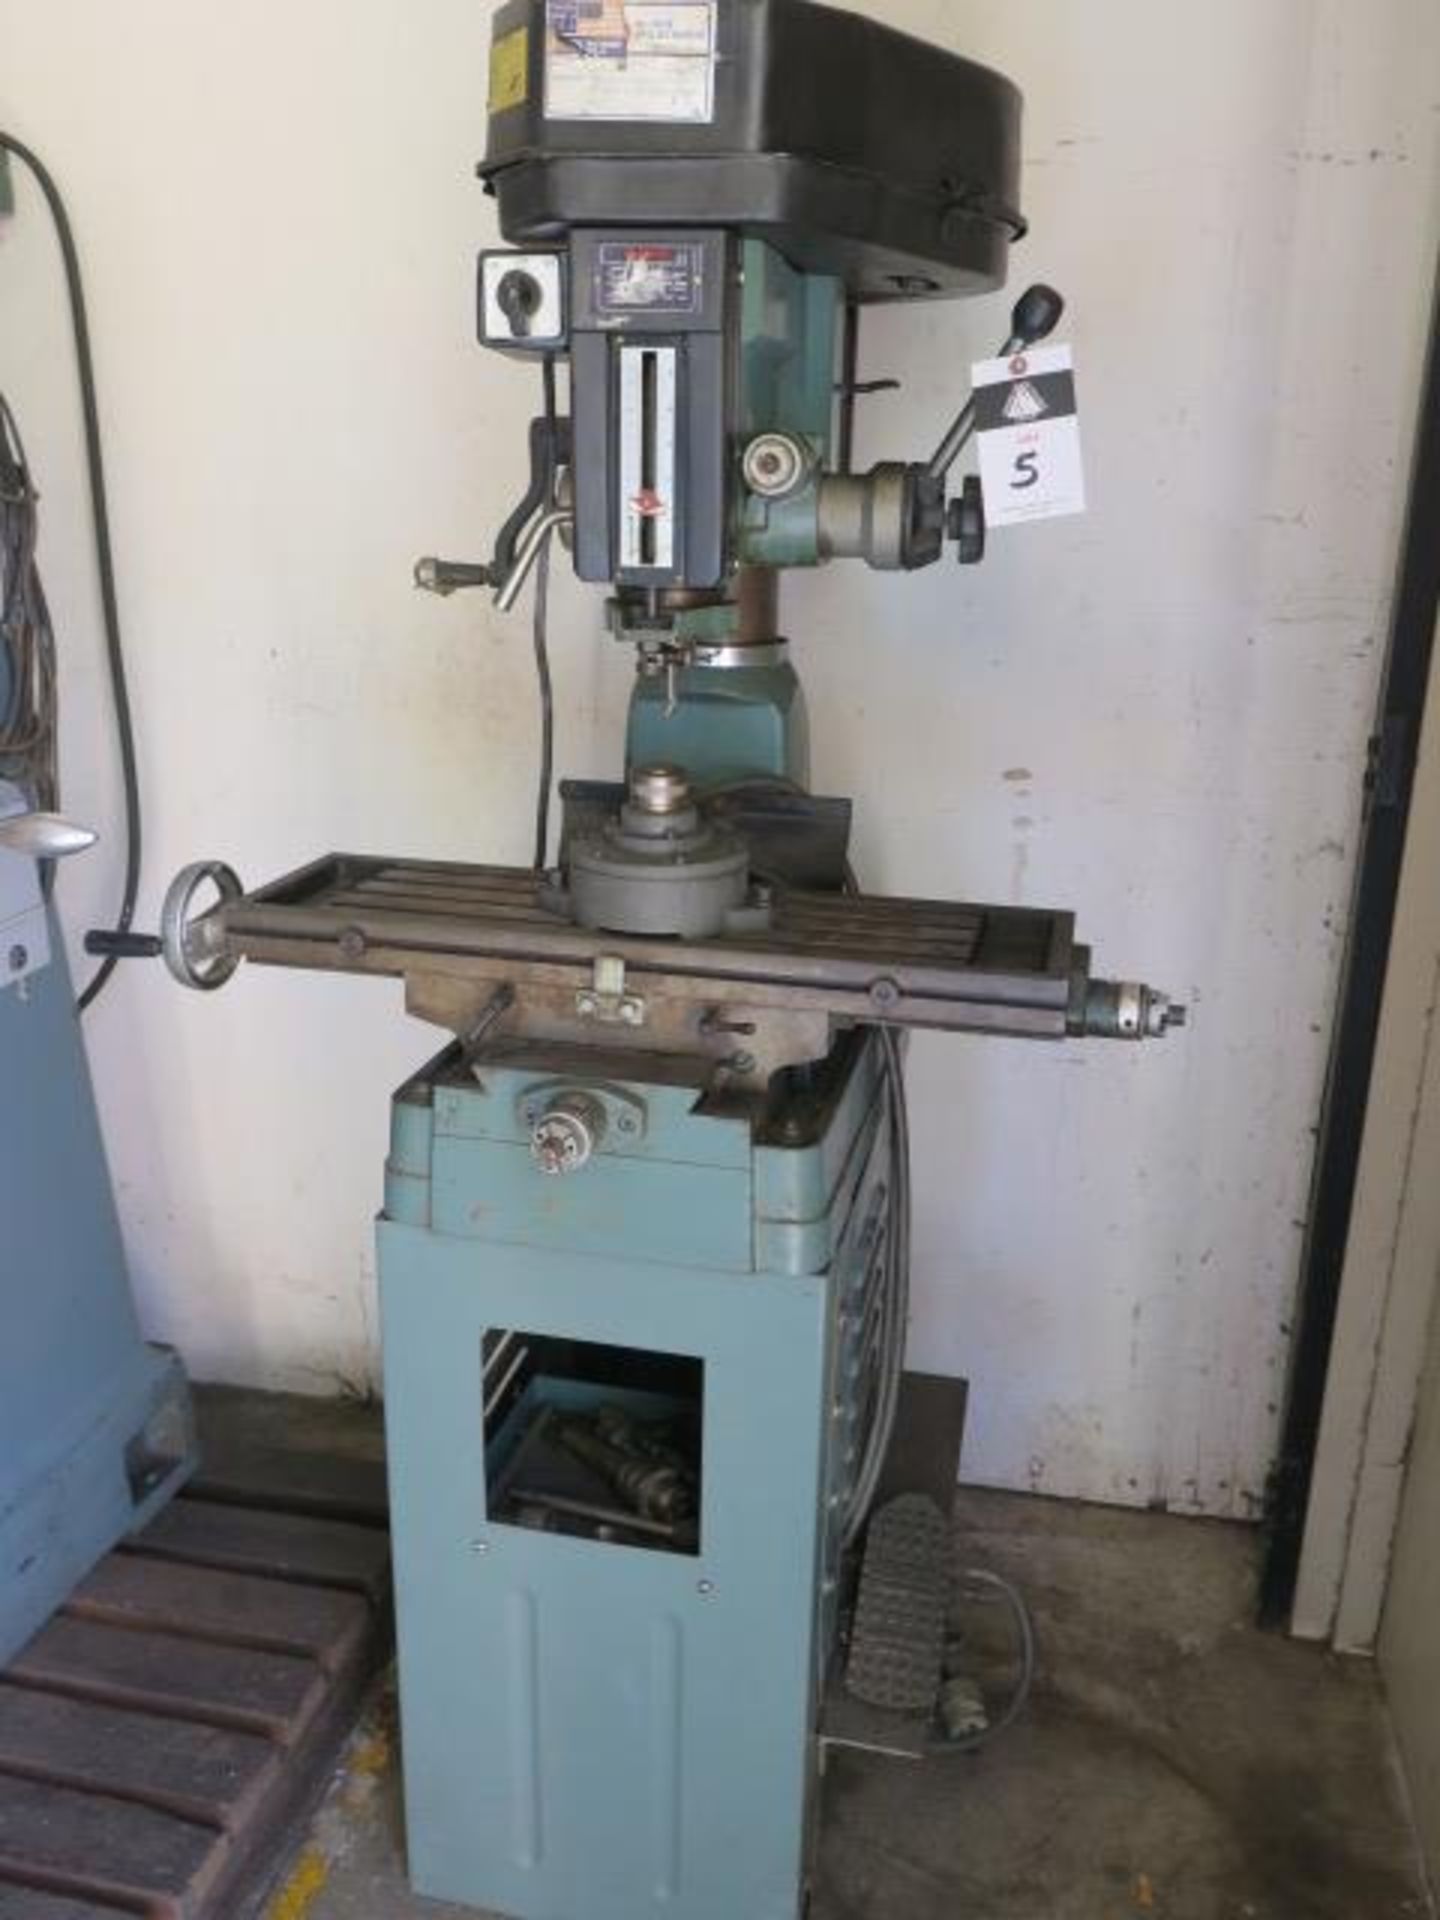 Enco 105-1120 Mill/Drill Machine s/n 236304 w/ R8 Spindle, Pneumatic 5C Collet Closer, SOLD AS IS